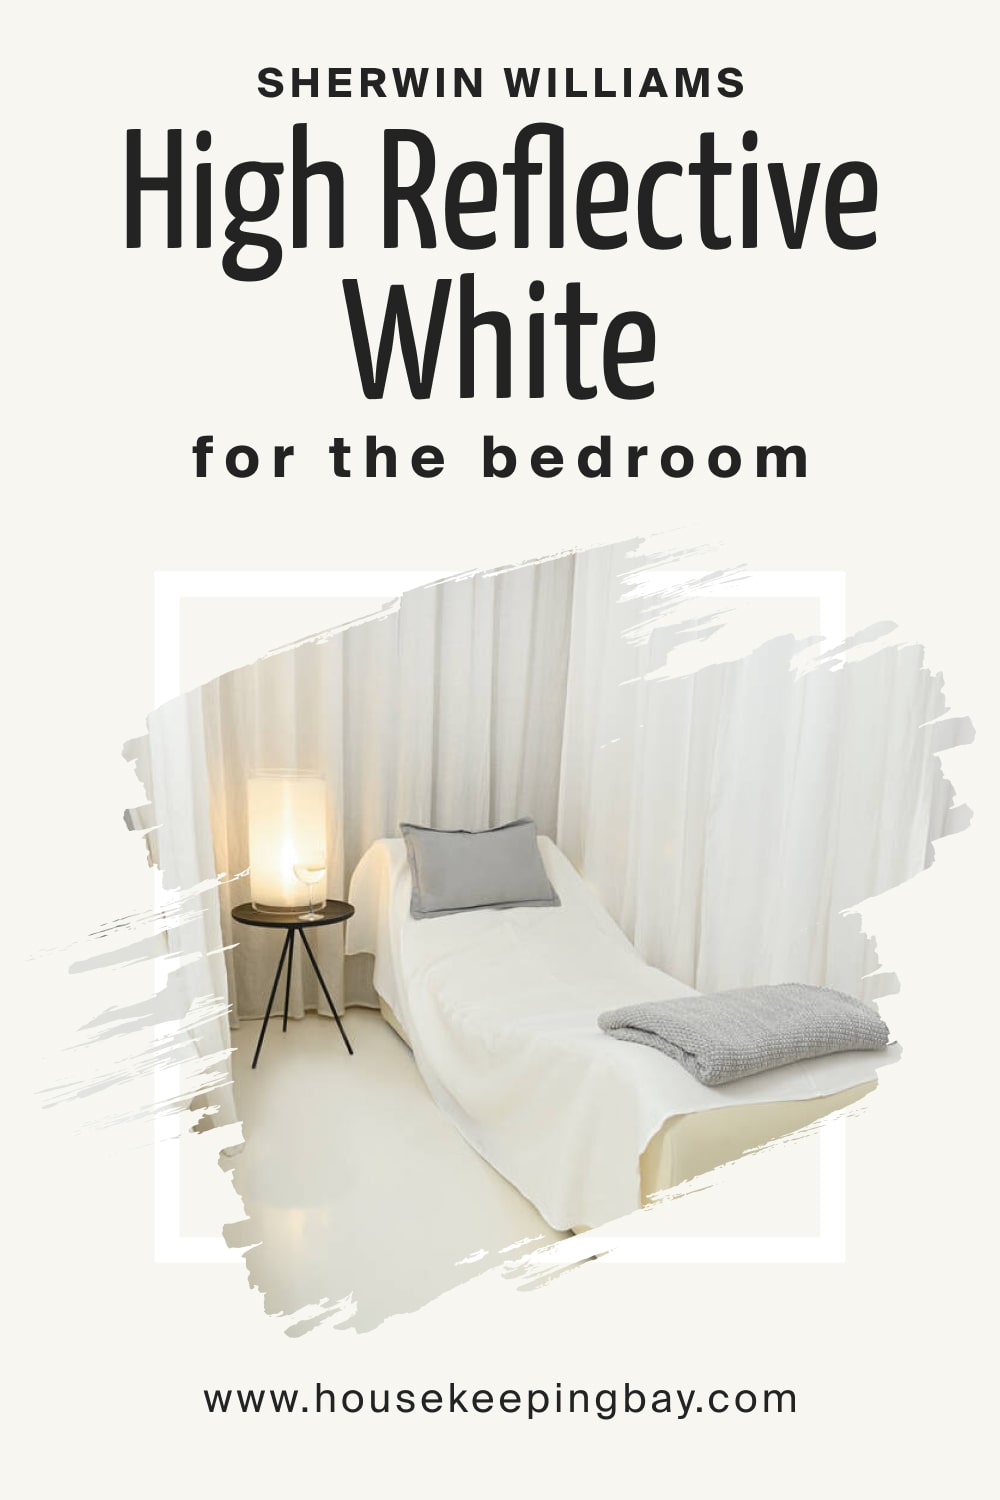 Sherwin Williams.High Reflective White SW 7757 For the bedroom